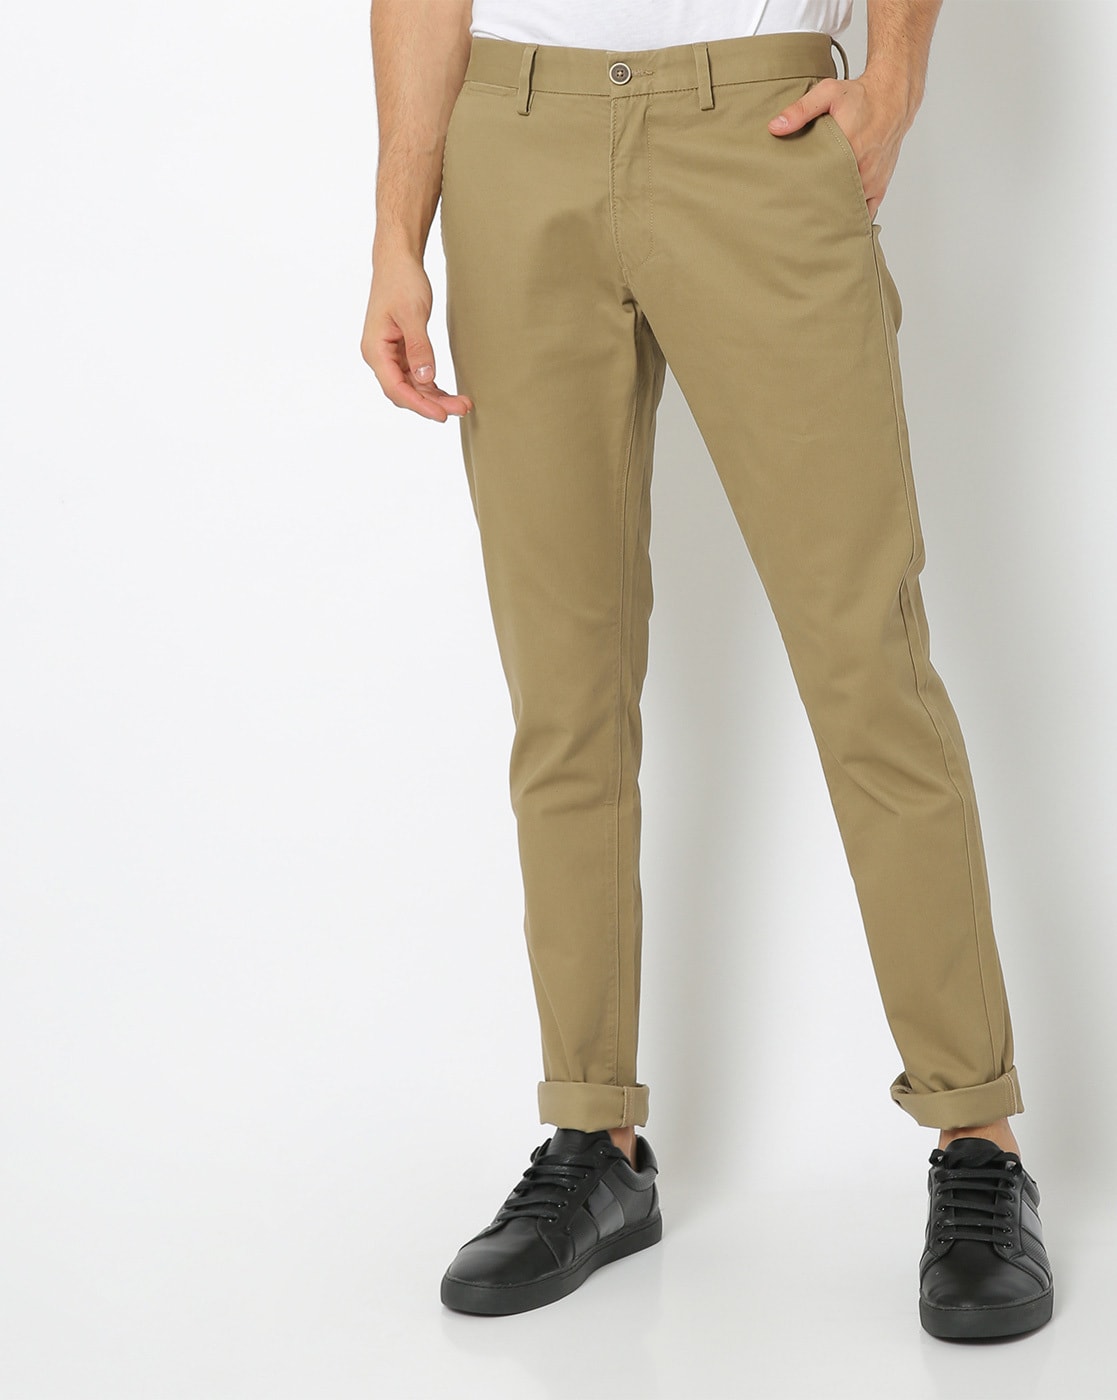 Buy Olive Trousers & Pants for Boys by Wotnot Online | Ajio.com